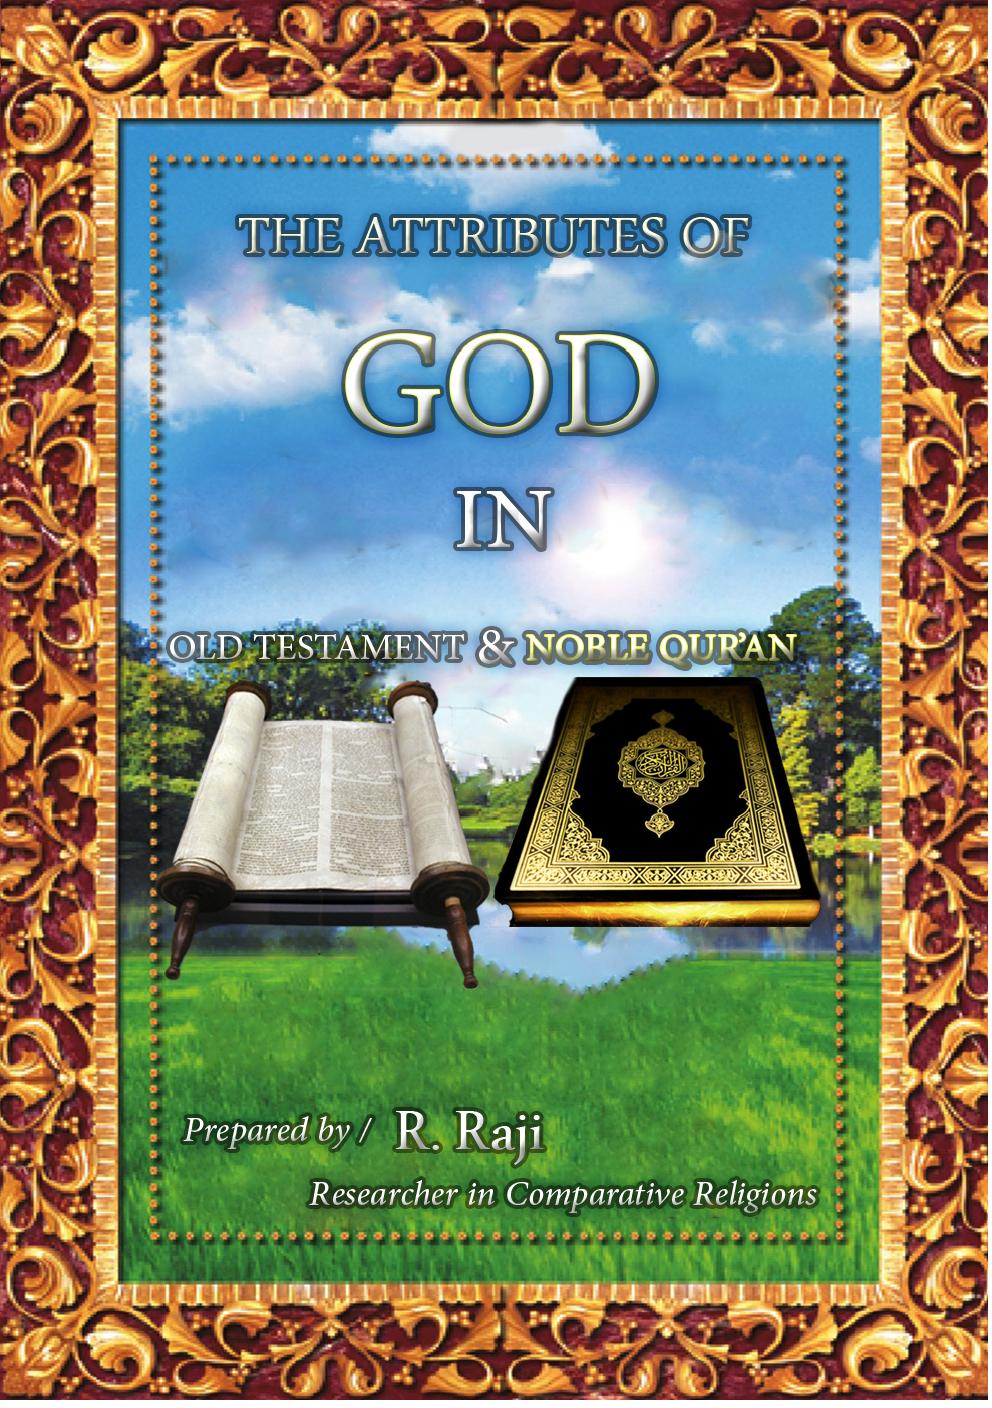 THE ATTRIBUTES OF GOD IN OLD TESTAMENT & NOBLE QUR’AN